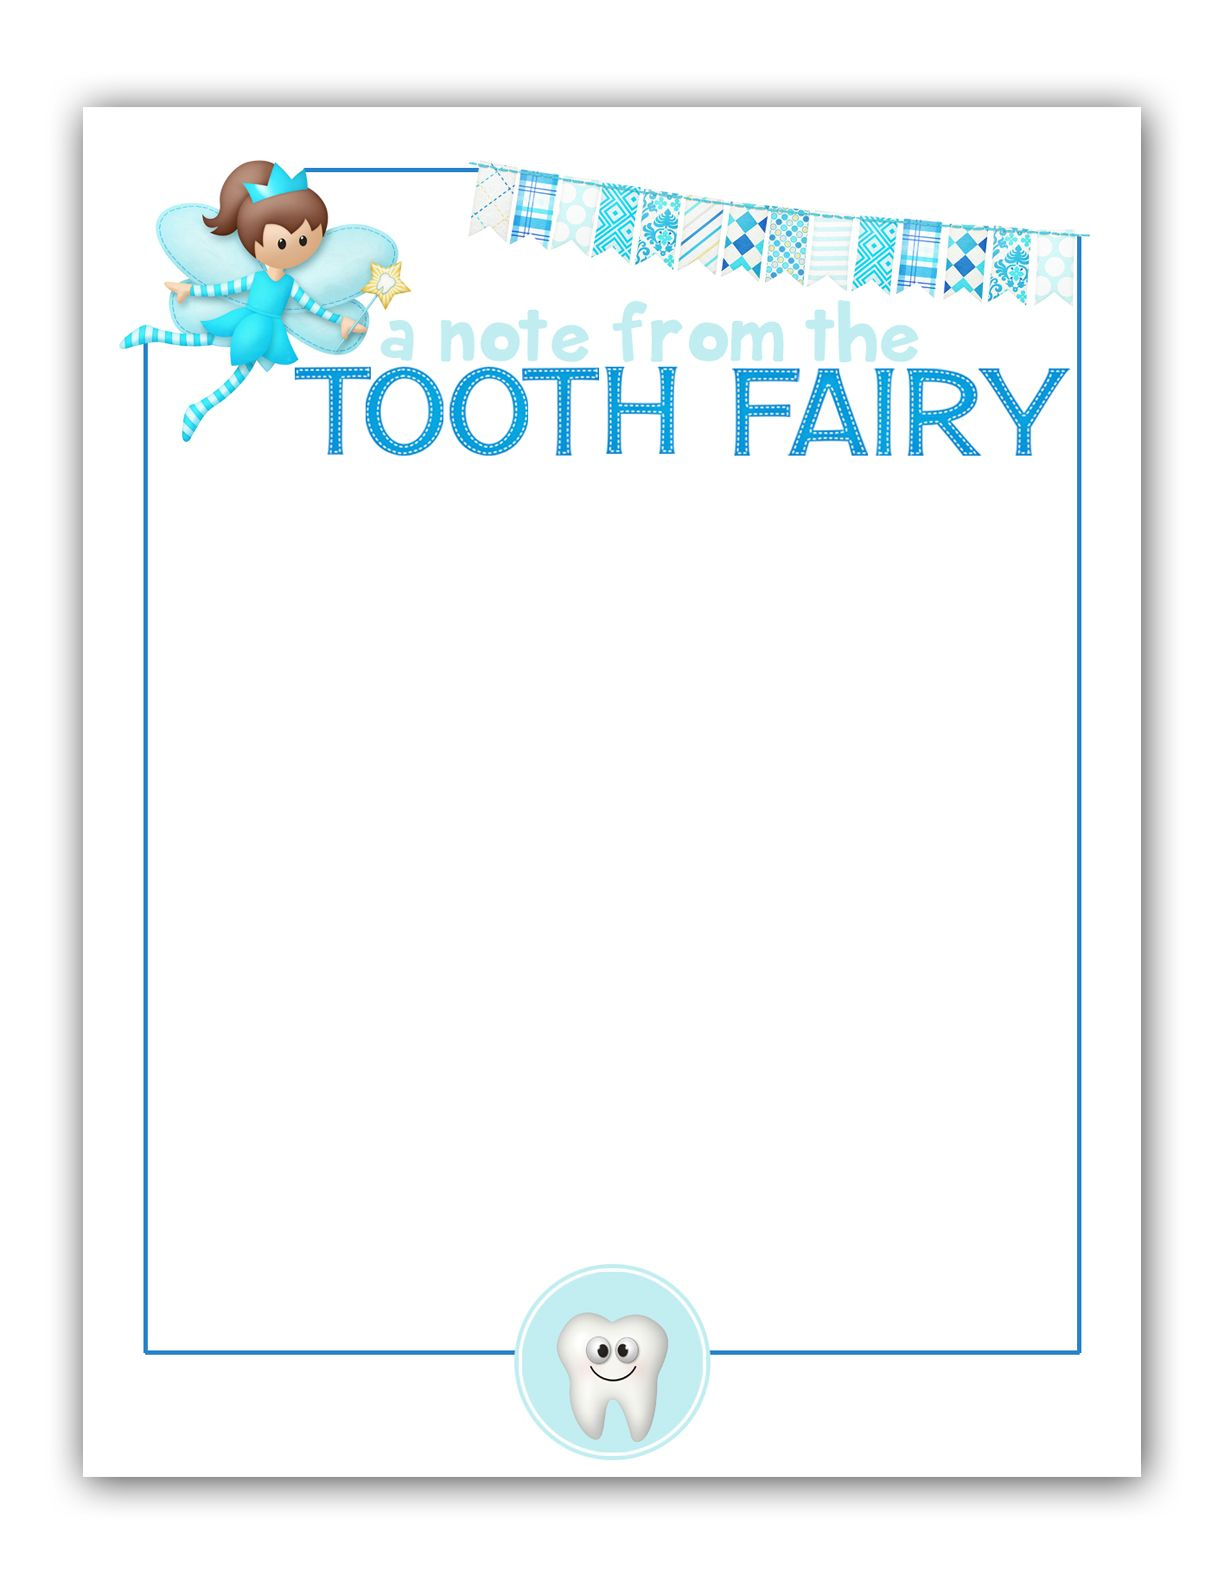 M|K Designs Blog: Tooth Fairy Stationary - Free Printable | Tooth - Tooth Fairy Stationery Free Printable